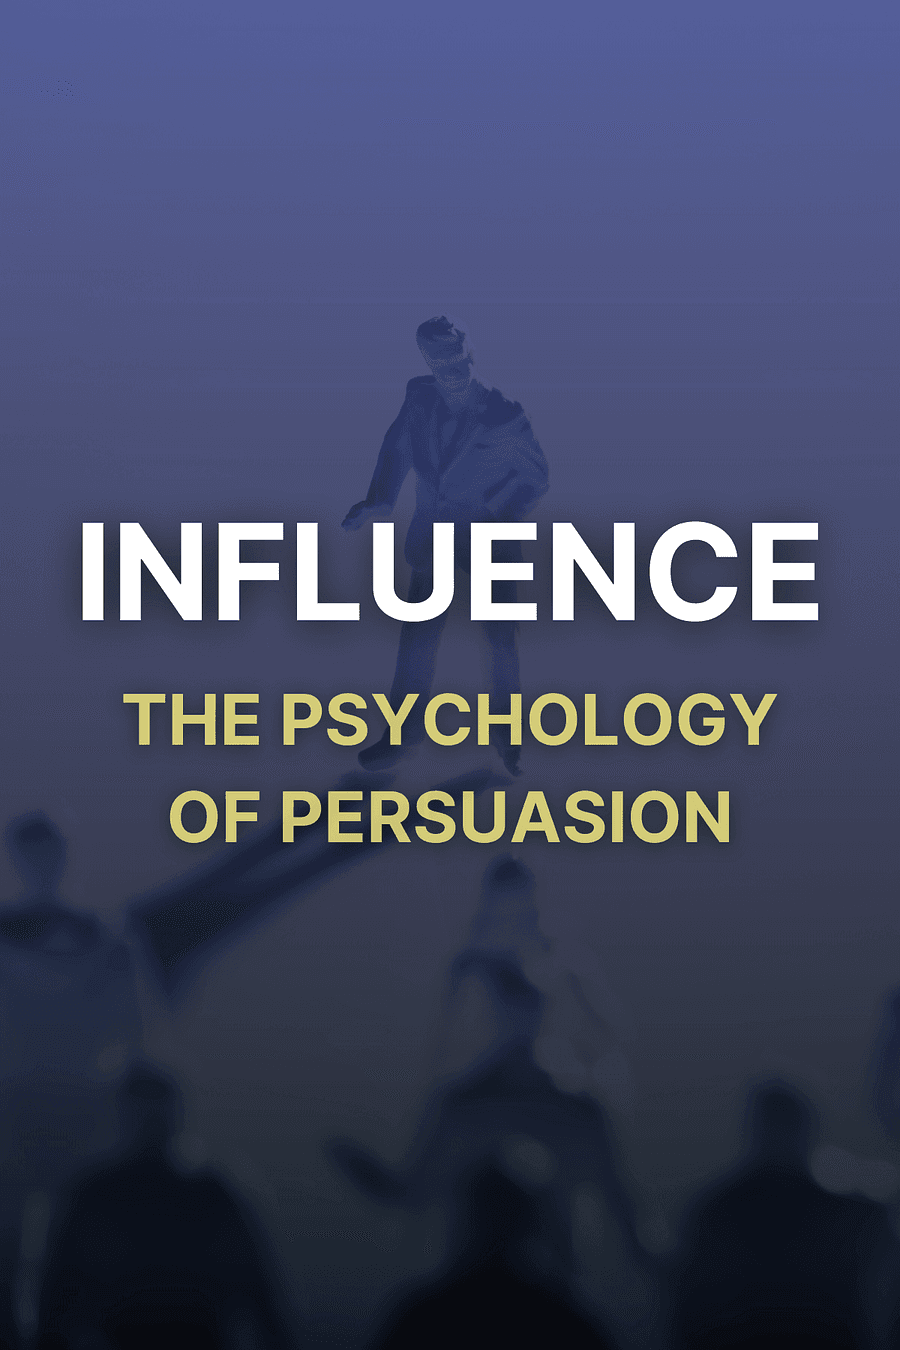 Influence, New and Expanded by Robert Cialdini - Book Summary